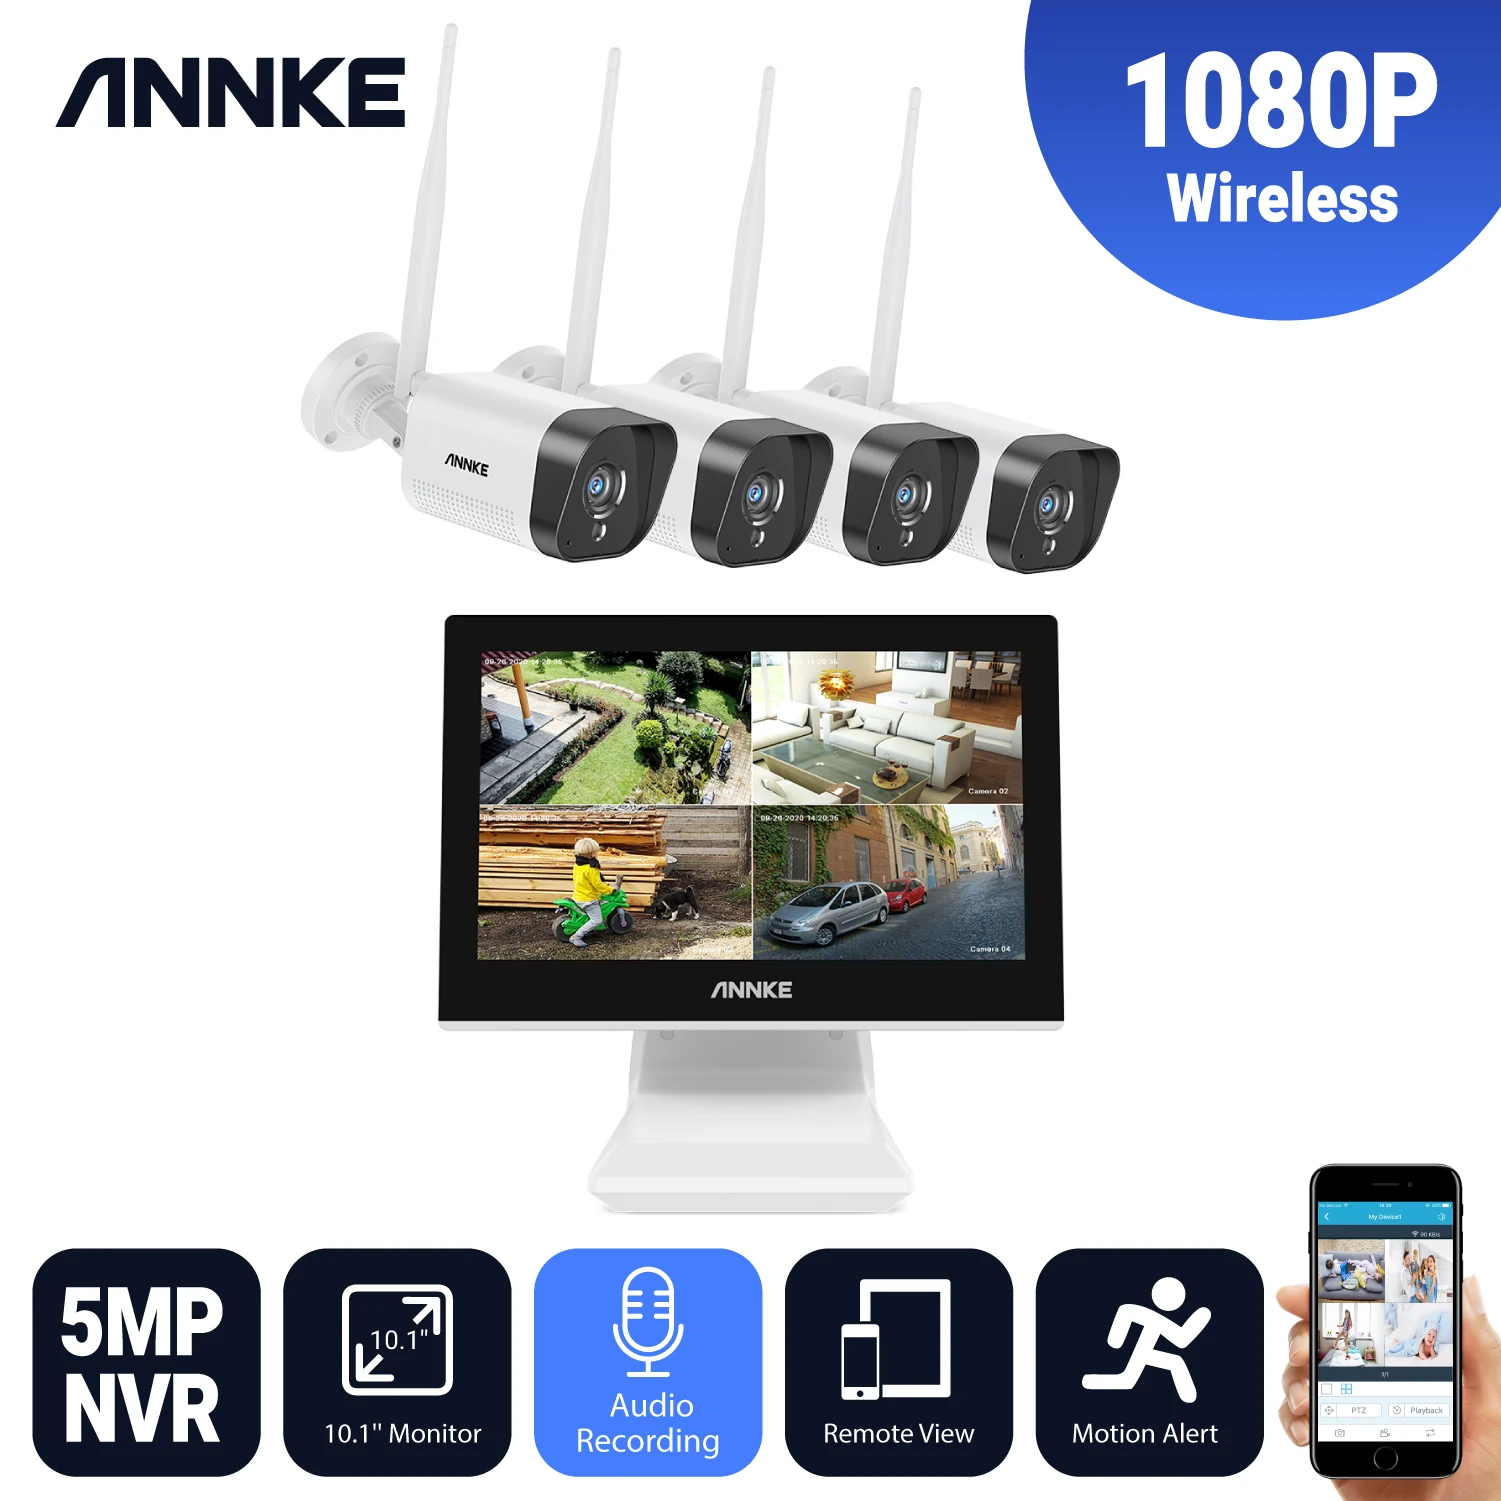 

ANNKE 4CH FHD 1080P Wireless Video Security System 10.1 inch LCD Screen 5MP NVR 4PCS IP Cameras Audio Recording Surveillance Kit